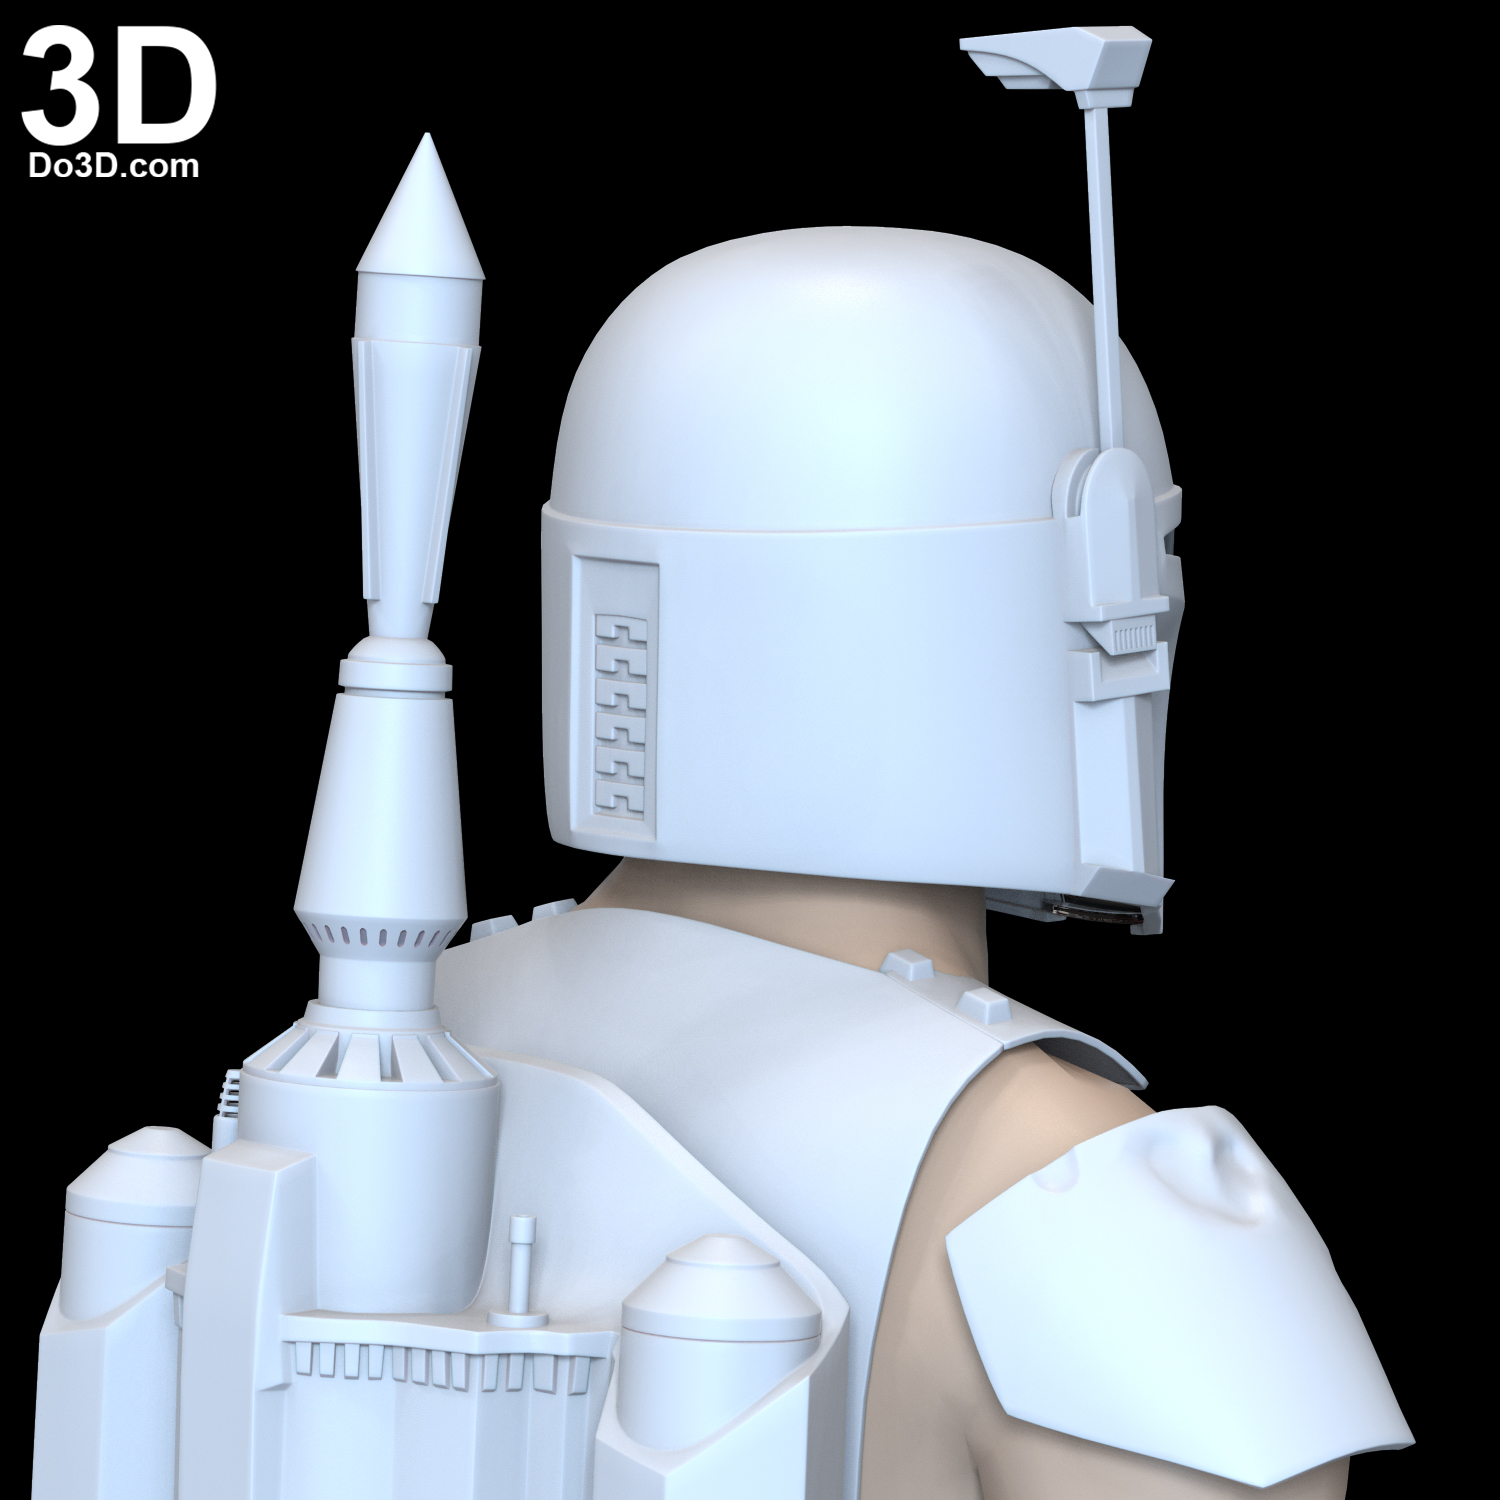 Star wars boba fett costume Jet Pack Thruster's 3d printed Parts cosplay 